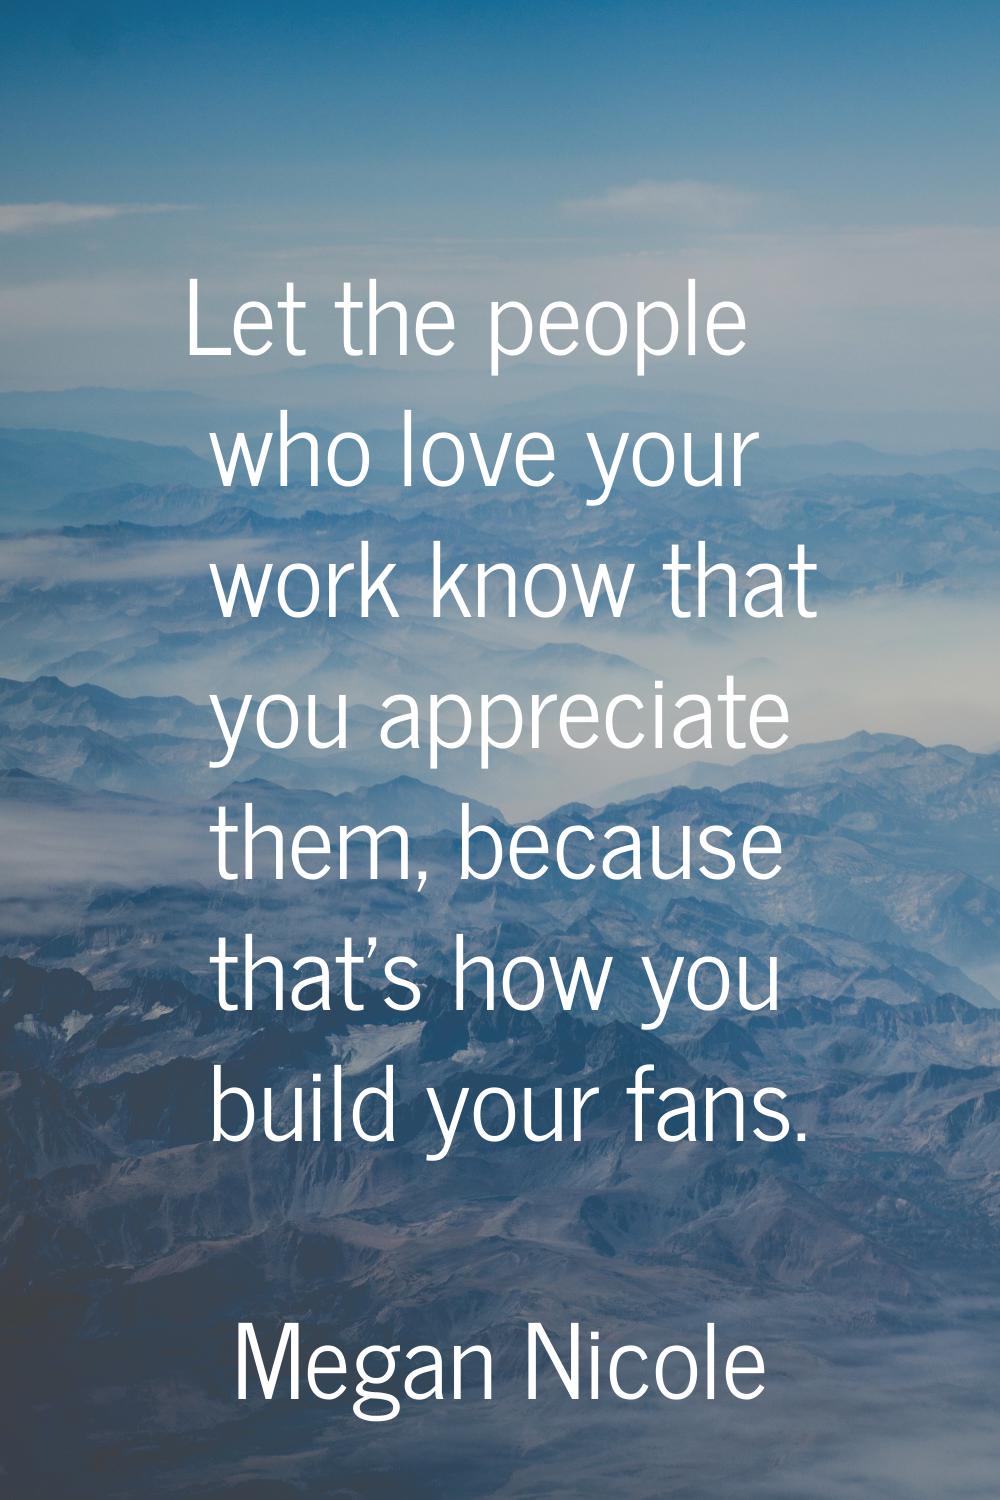 Let the people who love your work know that you appreciate them, because that's how you build your 